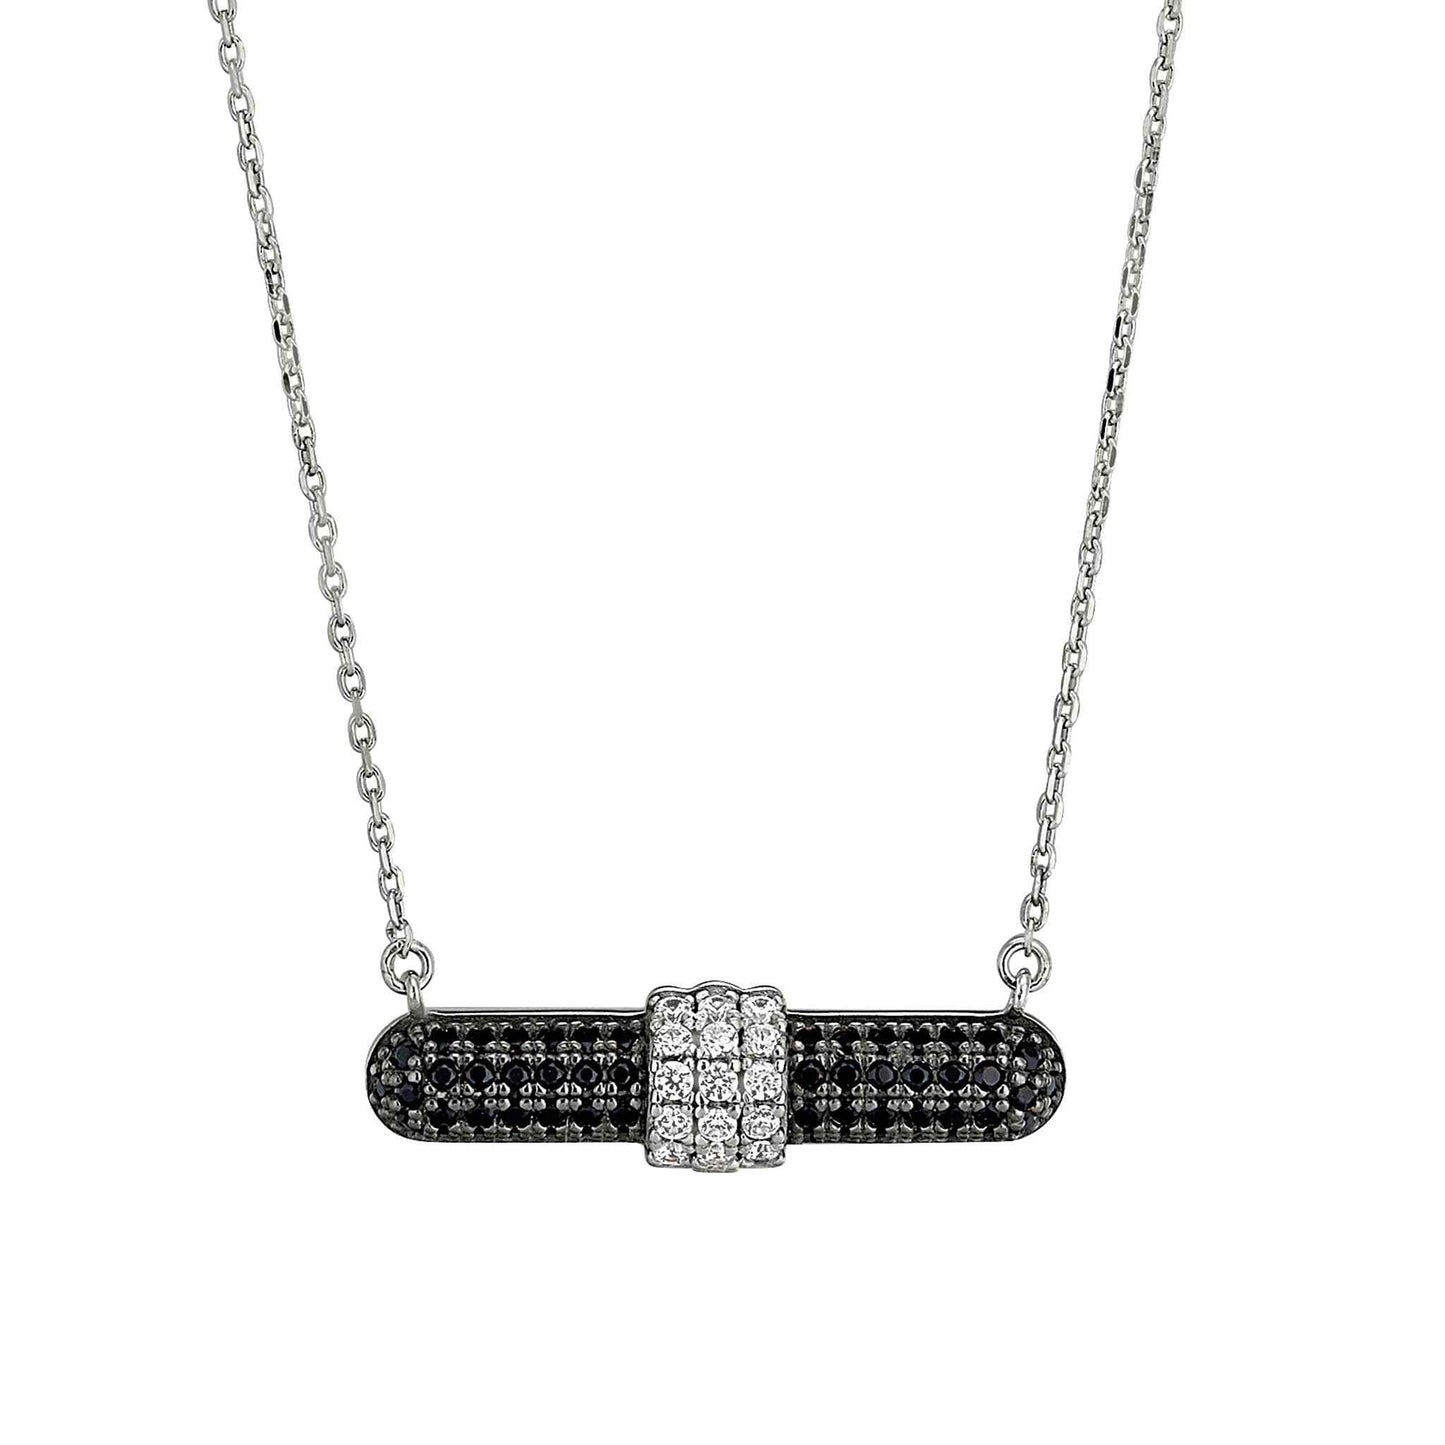 A necklace with black & white simulated diamonds displayed on a neutral white background.